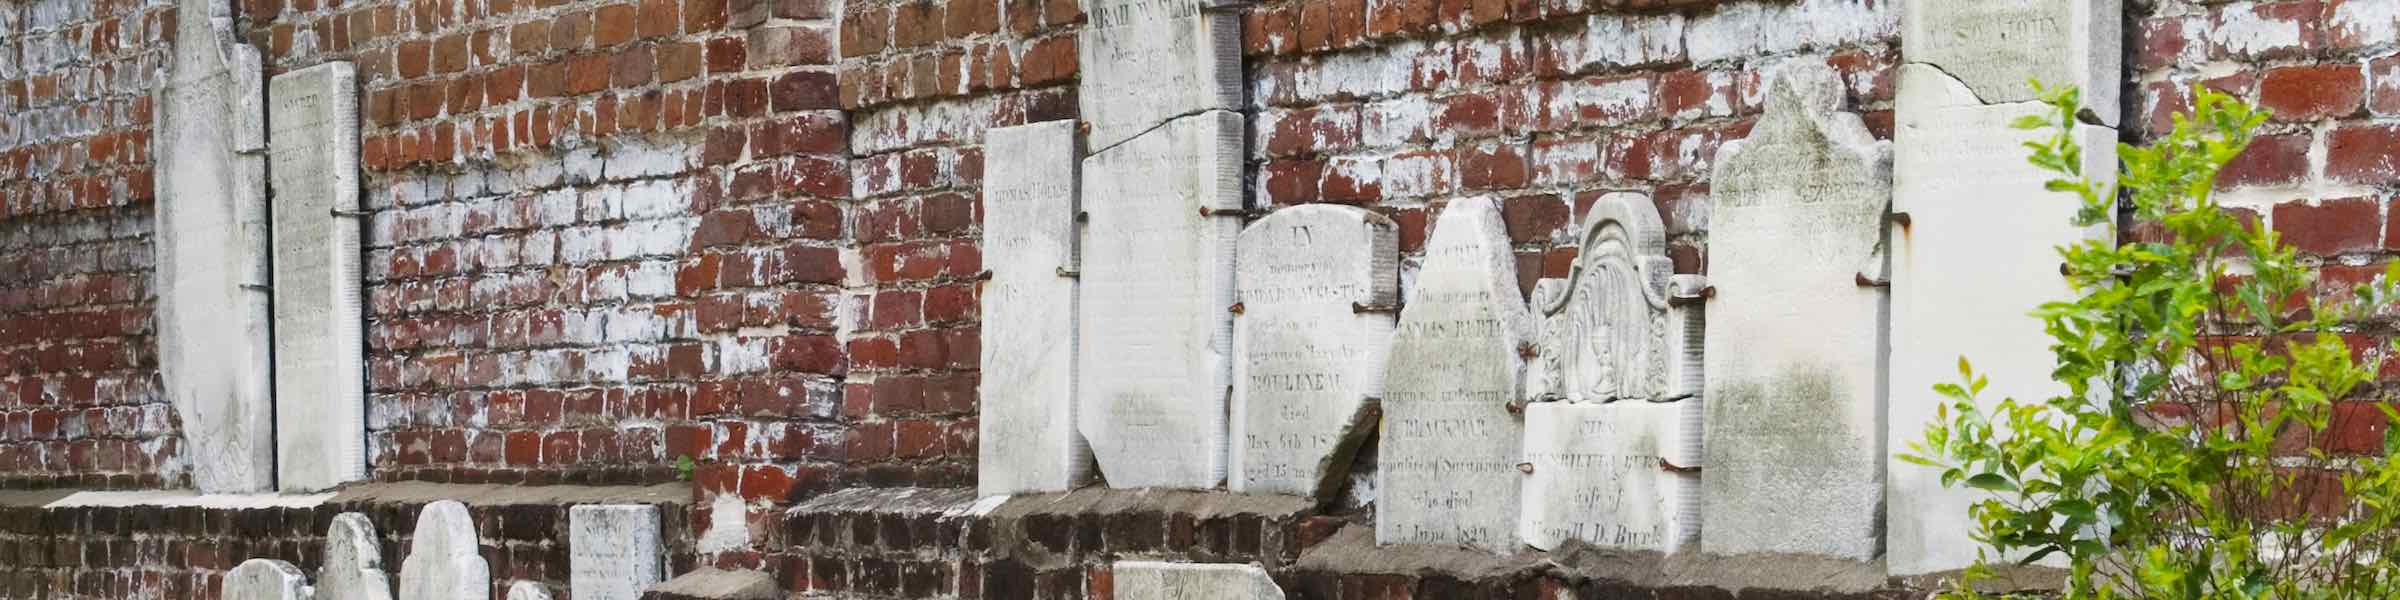 Grave stones mounted on the rear wall in Savannah's Colonial Park Cemetery.